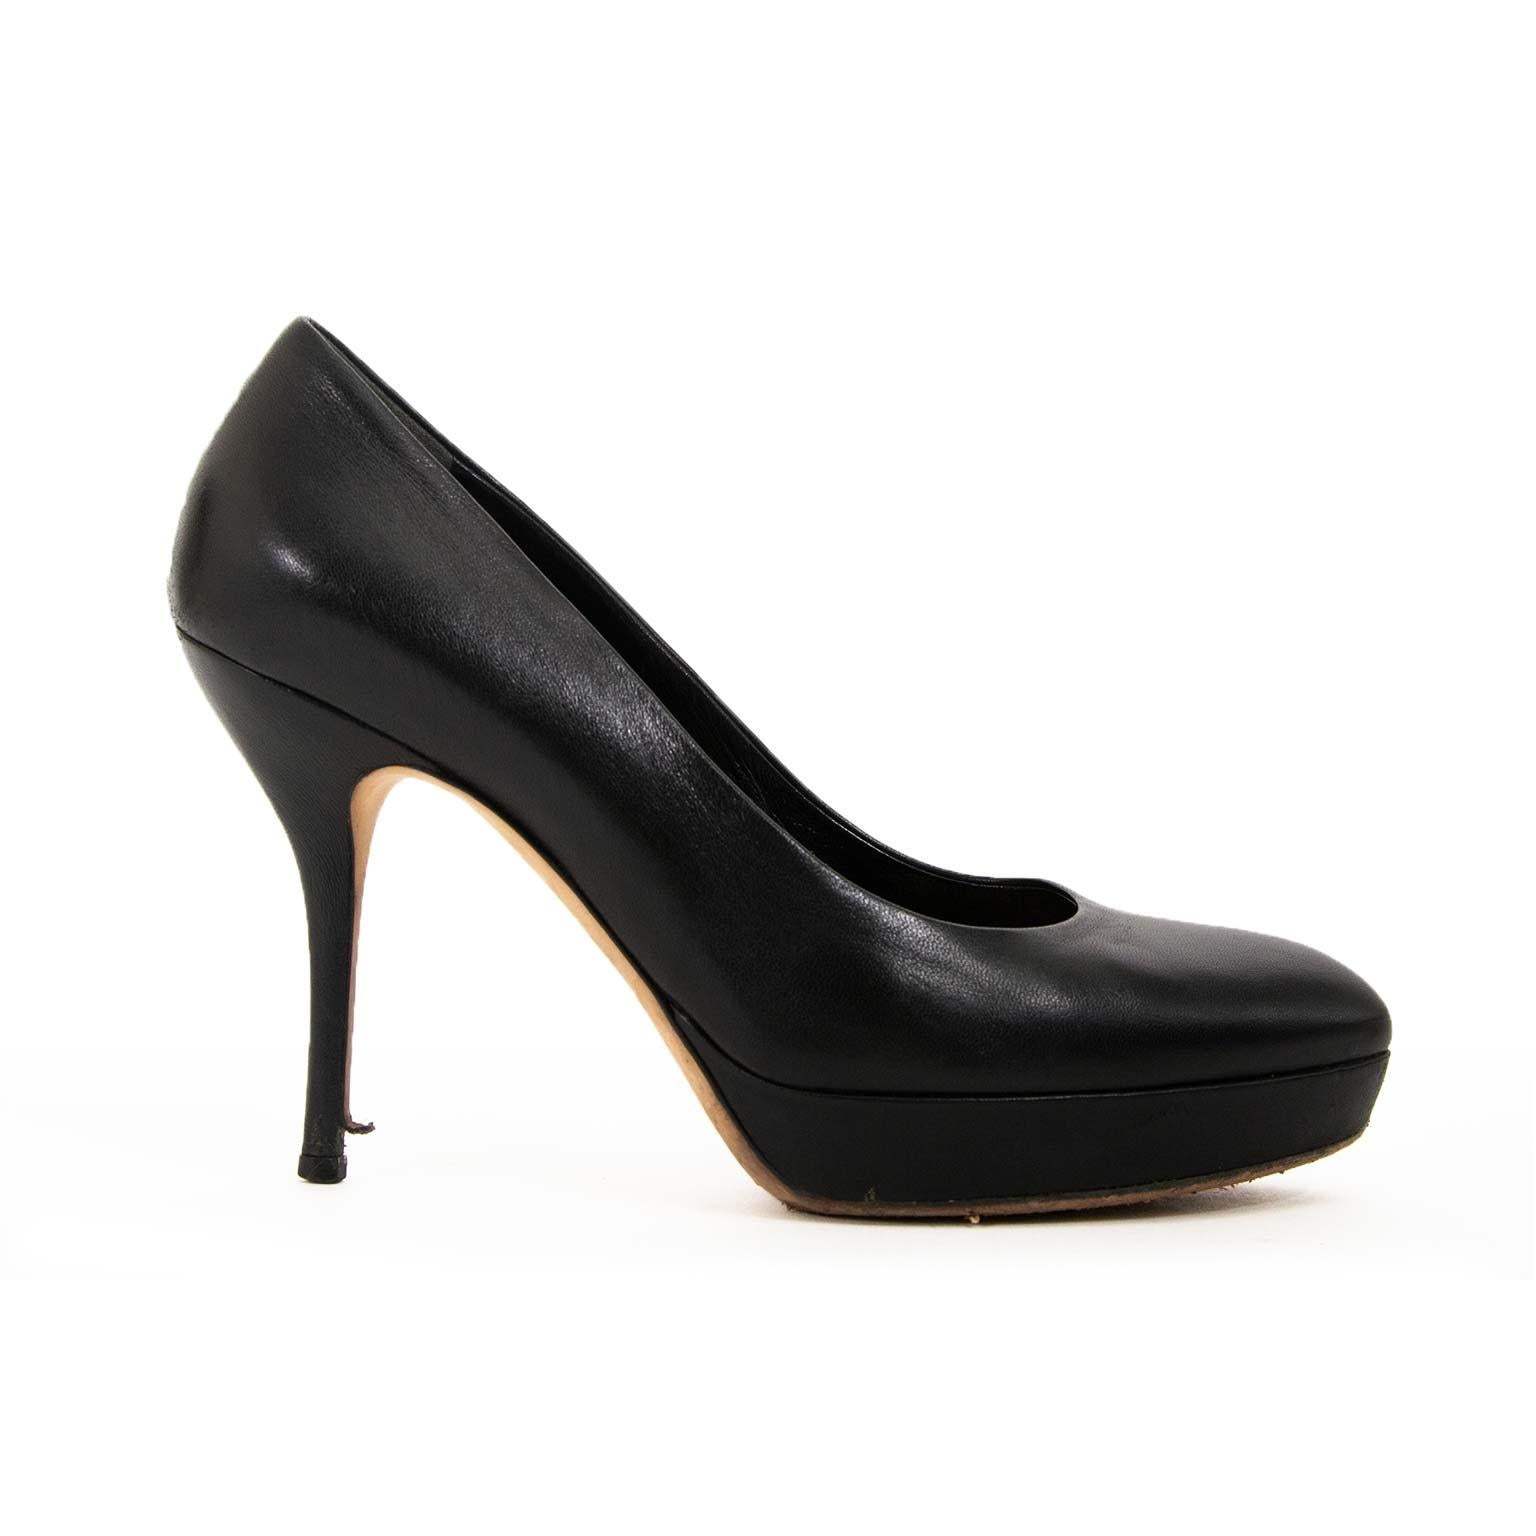 Gucci Black Leather Pumps - Size 38 In Good Condition For Sale In Antwerp, BE